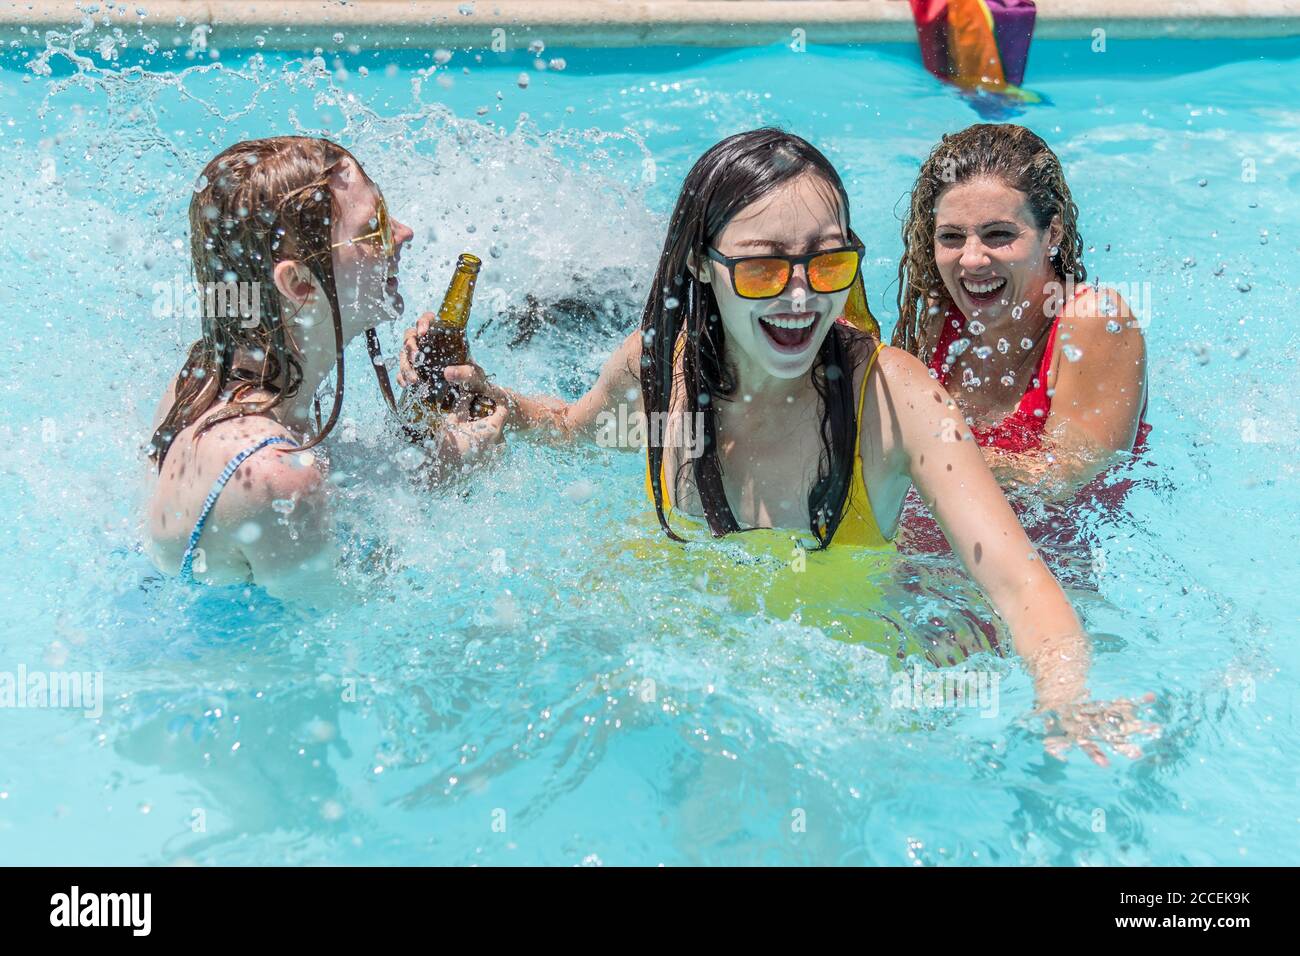 A group of young women from different ethnic groups playing splash around in a pool Stock Photo